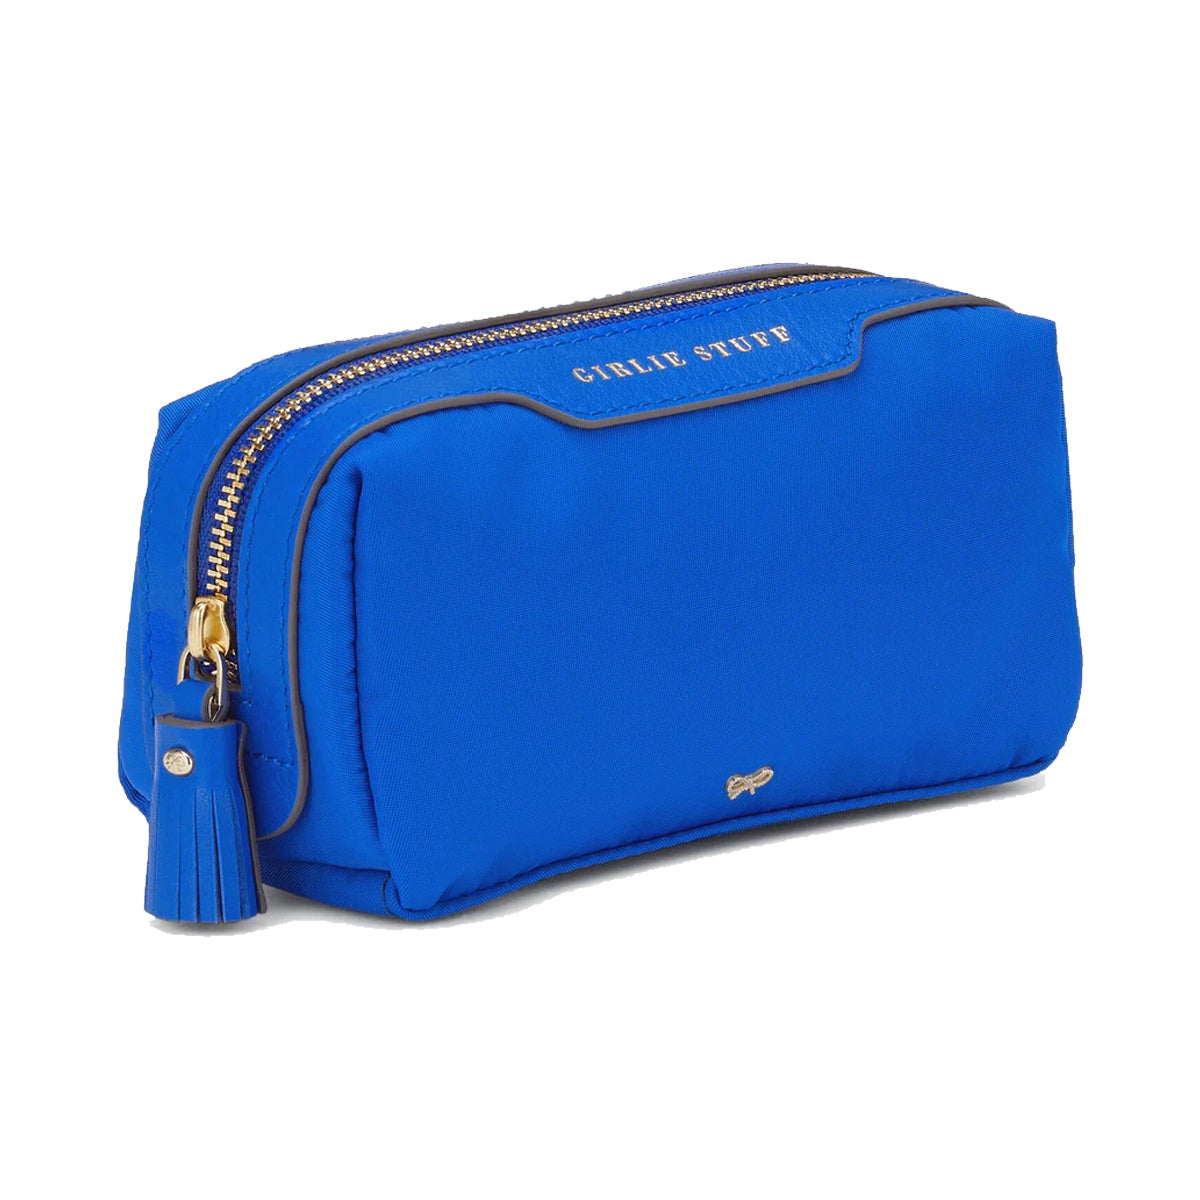 "Girlie Stuff" Pouch in Blue Nylon - Anya Hindmarch